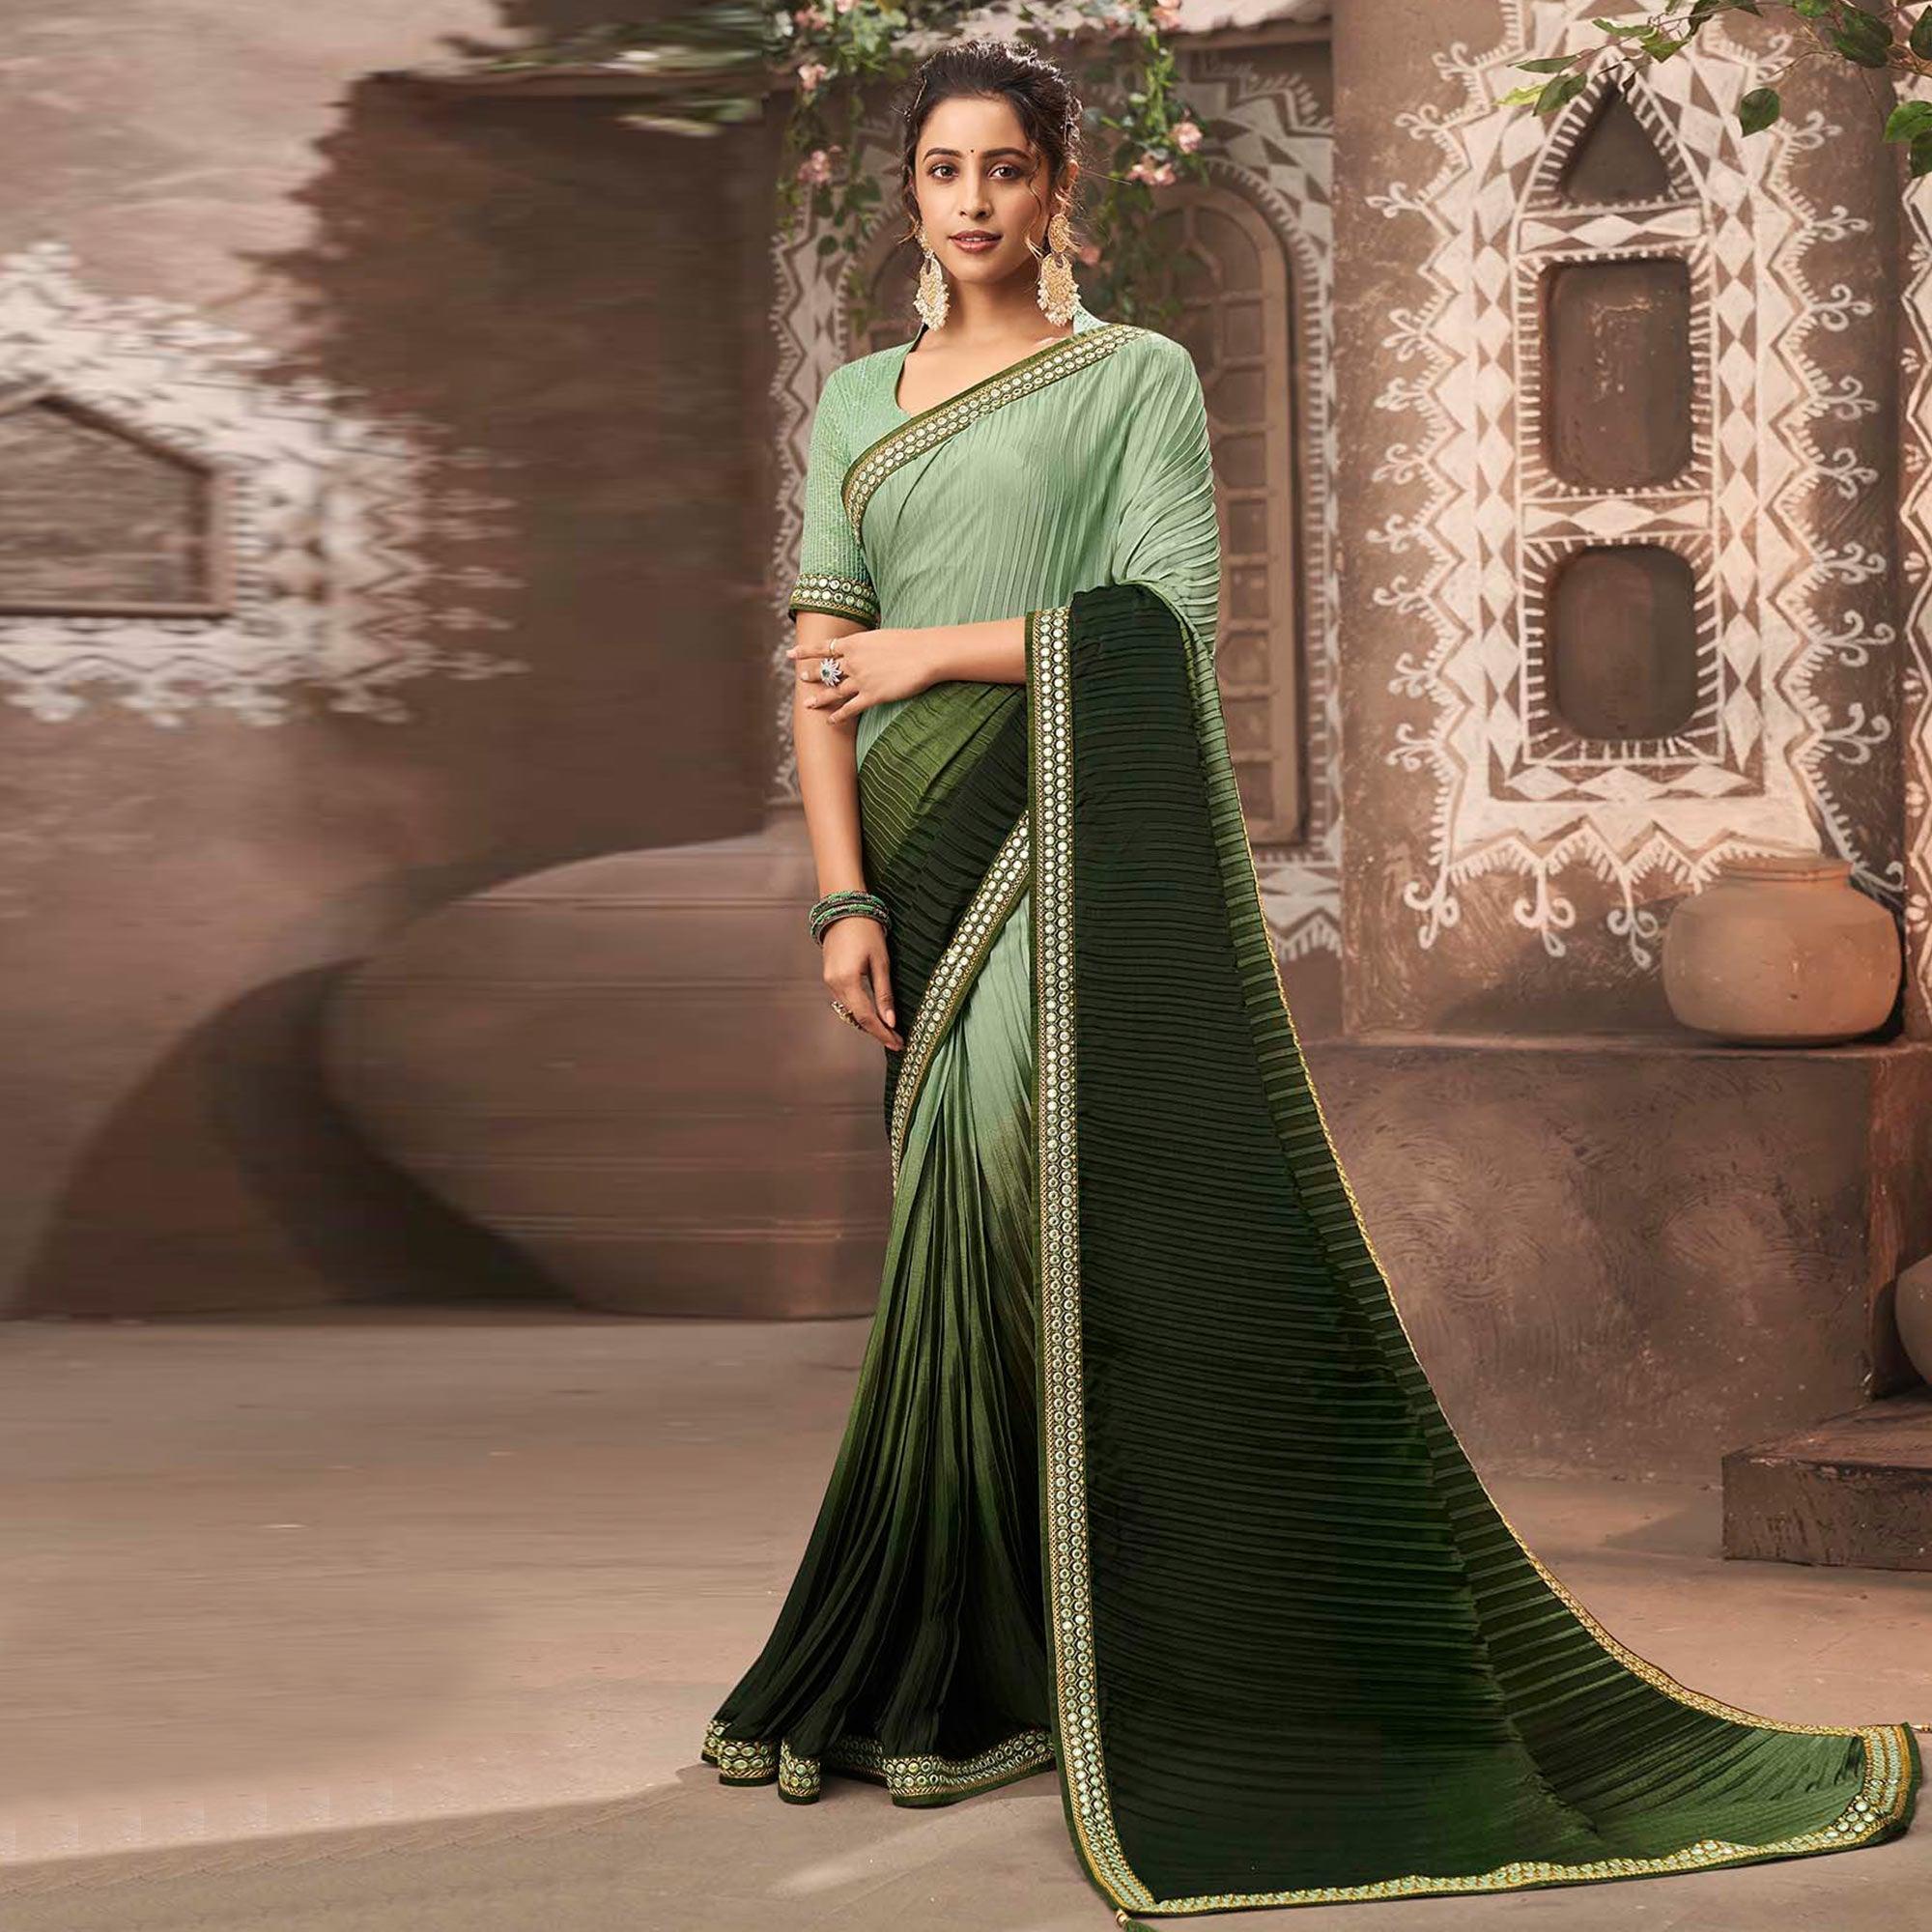 Bottle Green Partywear Crushed Chiffon Saree with Fancy Lace - Peachmode